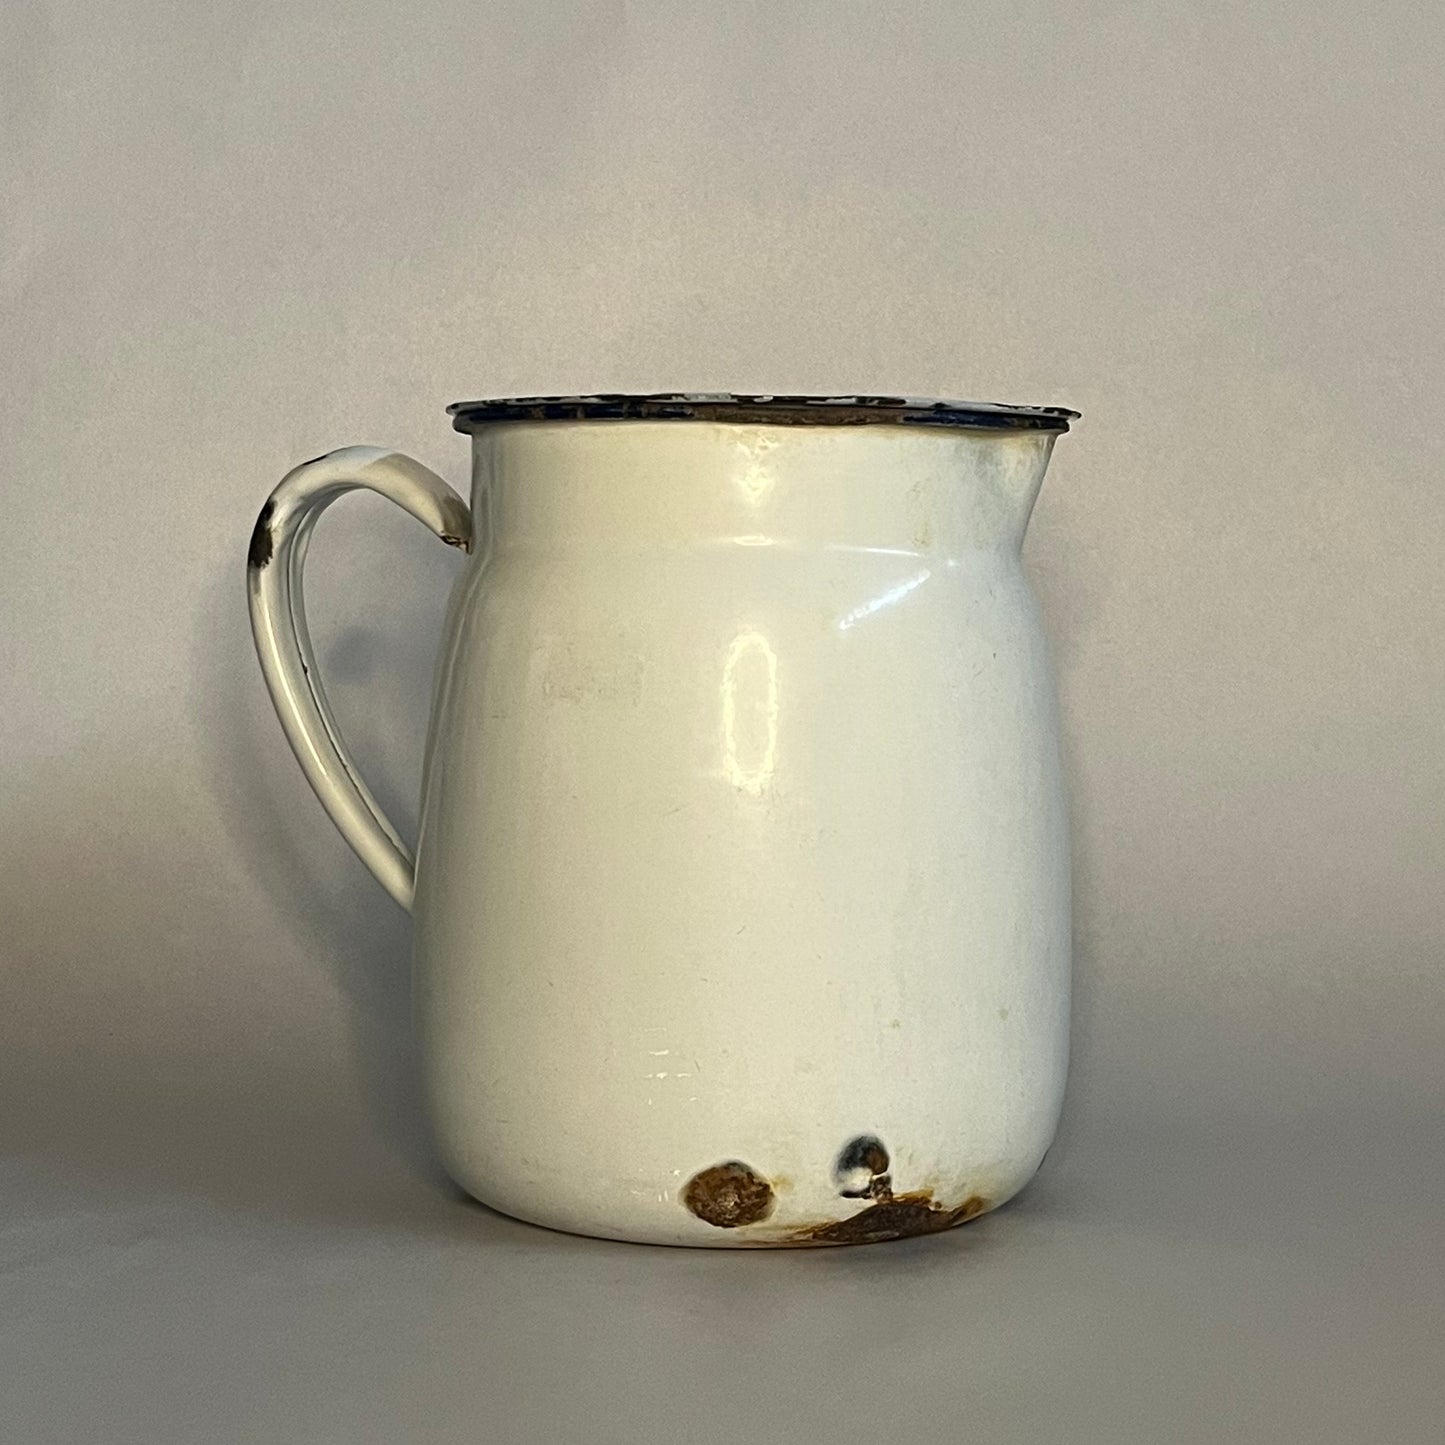 Enamel Pitcher with Lid